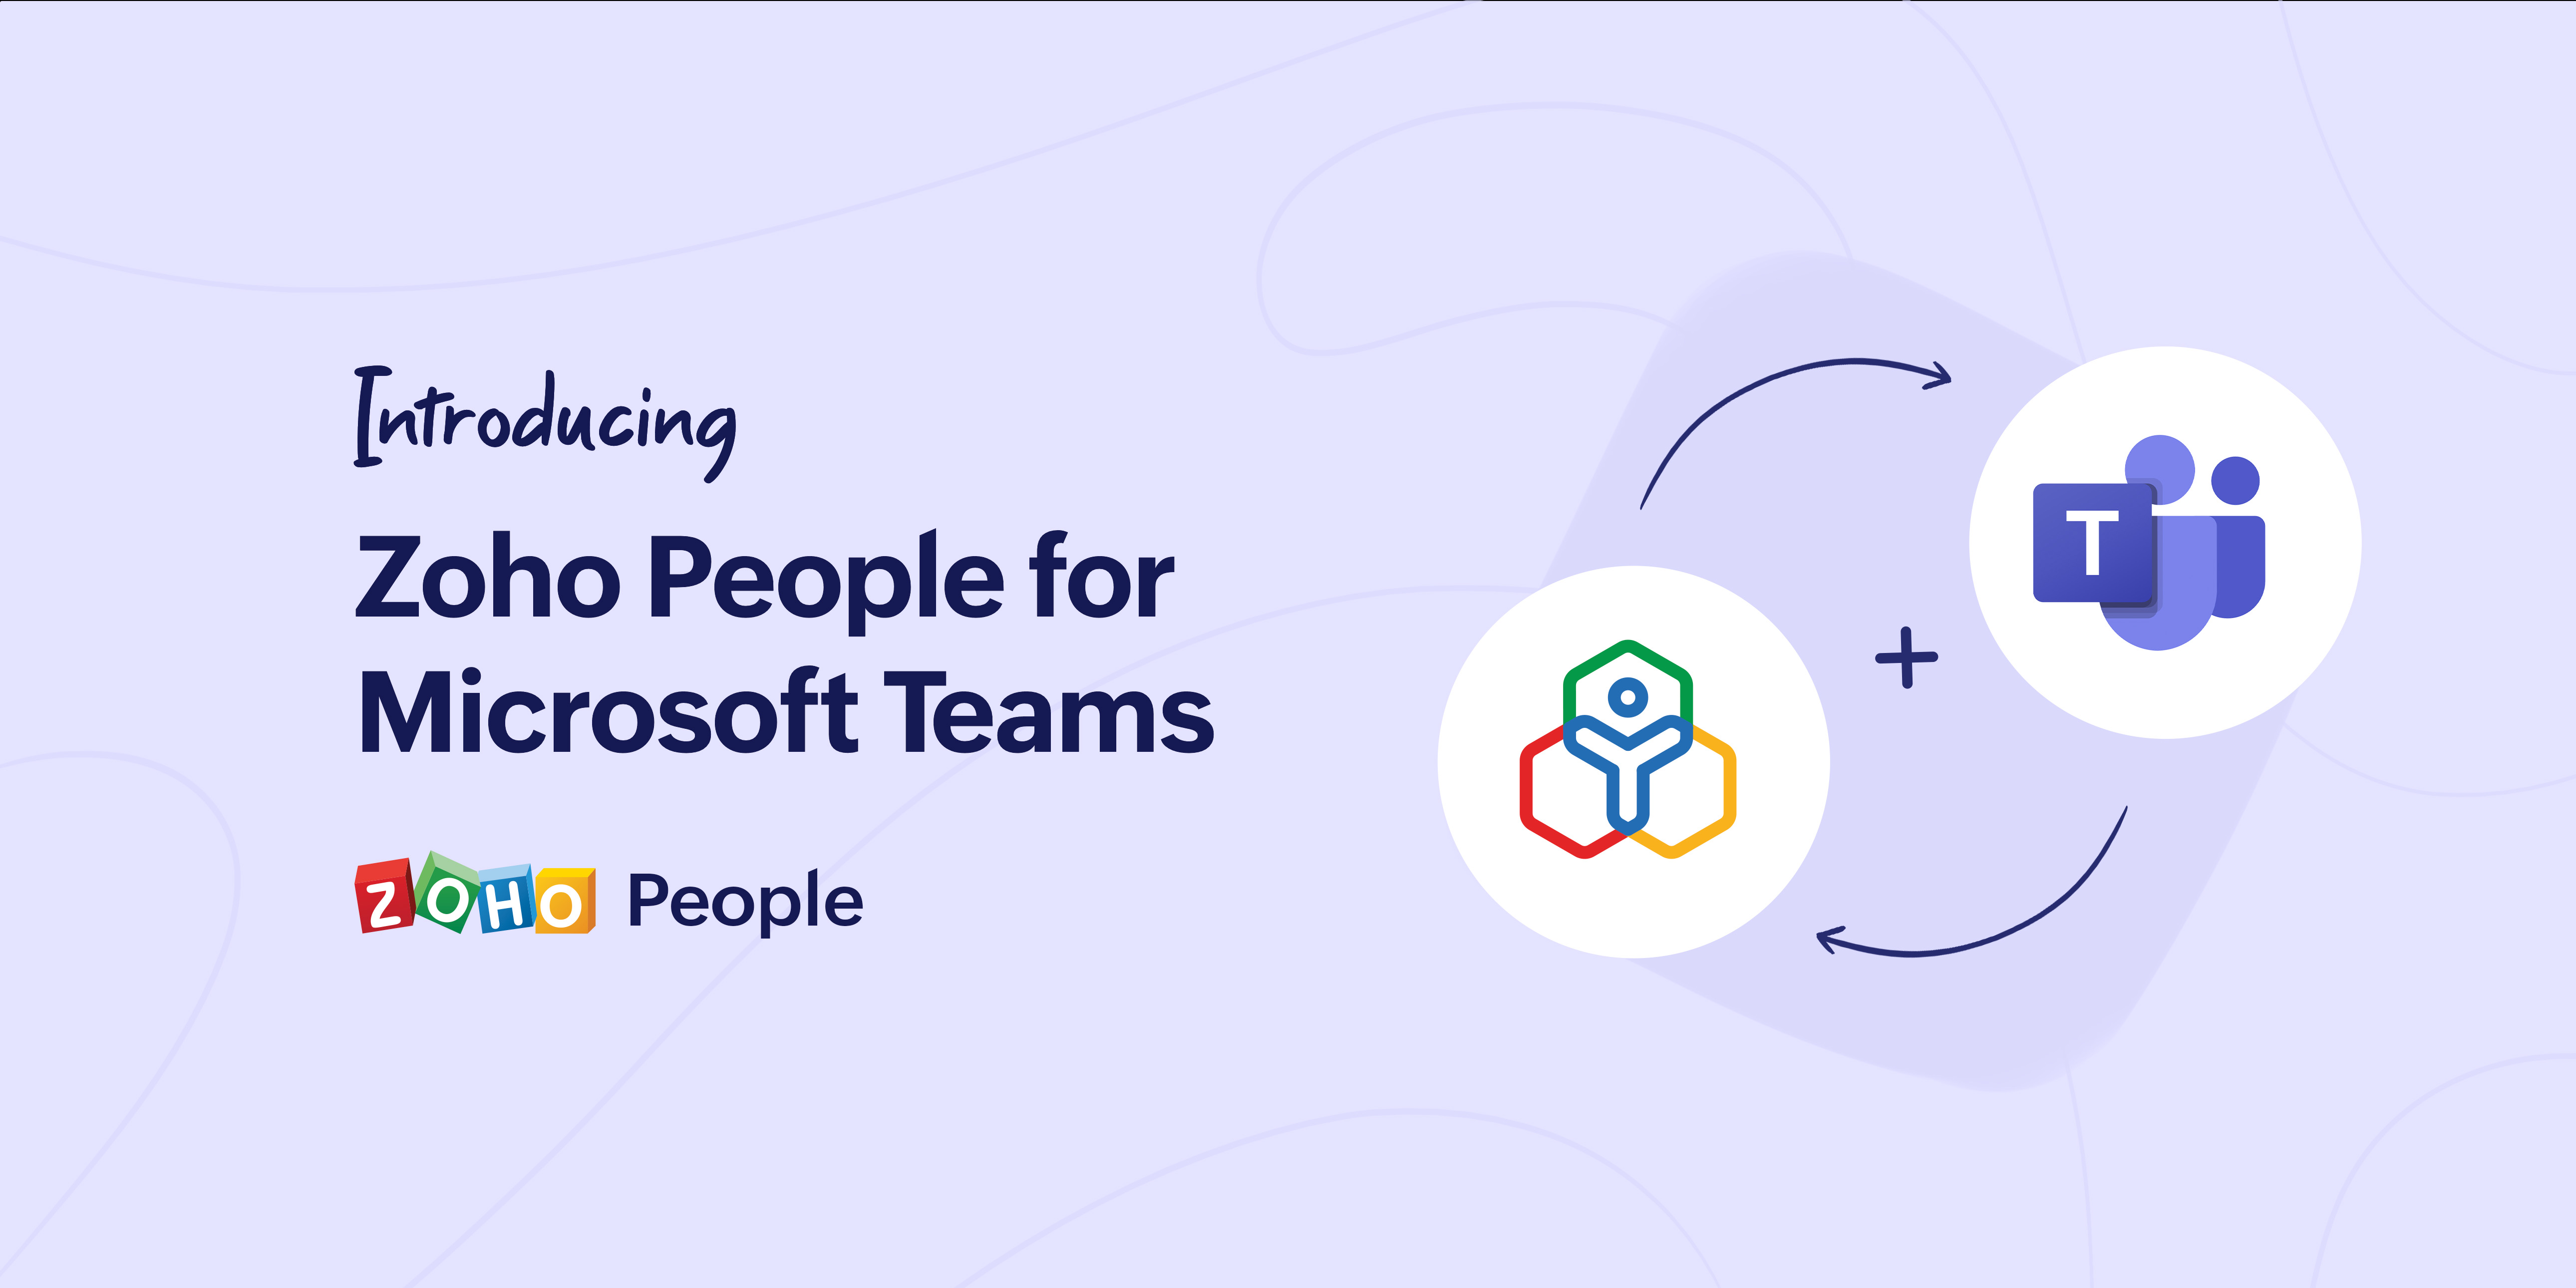 Introducing Zoho People for Microsoft Teams